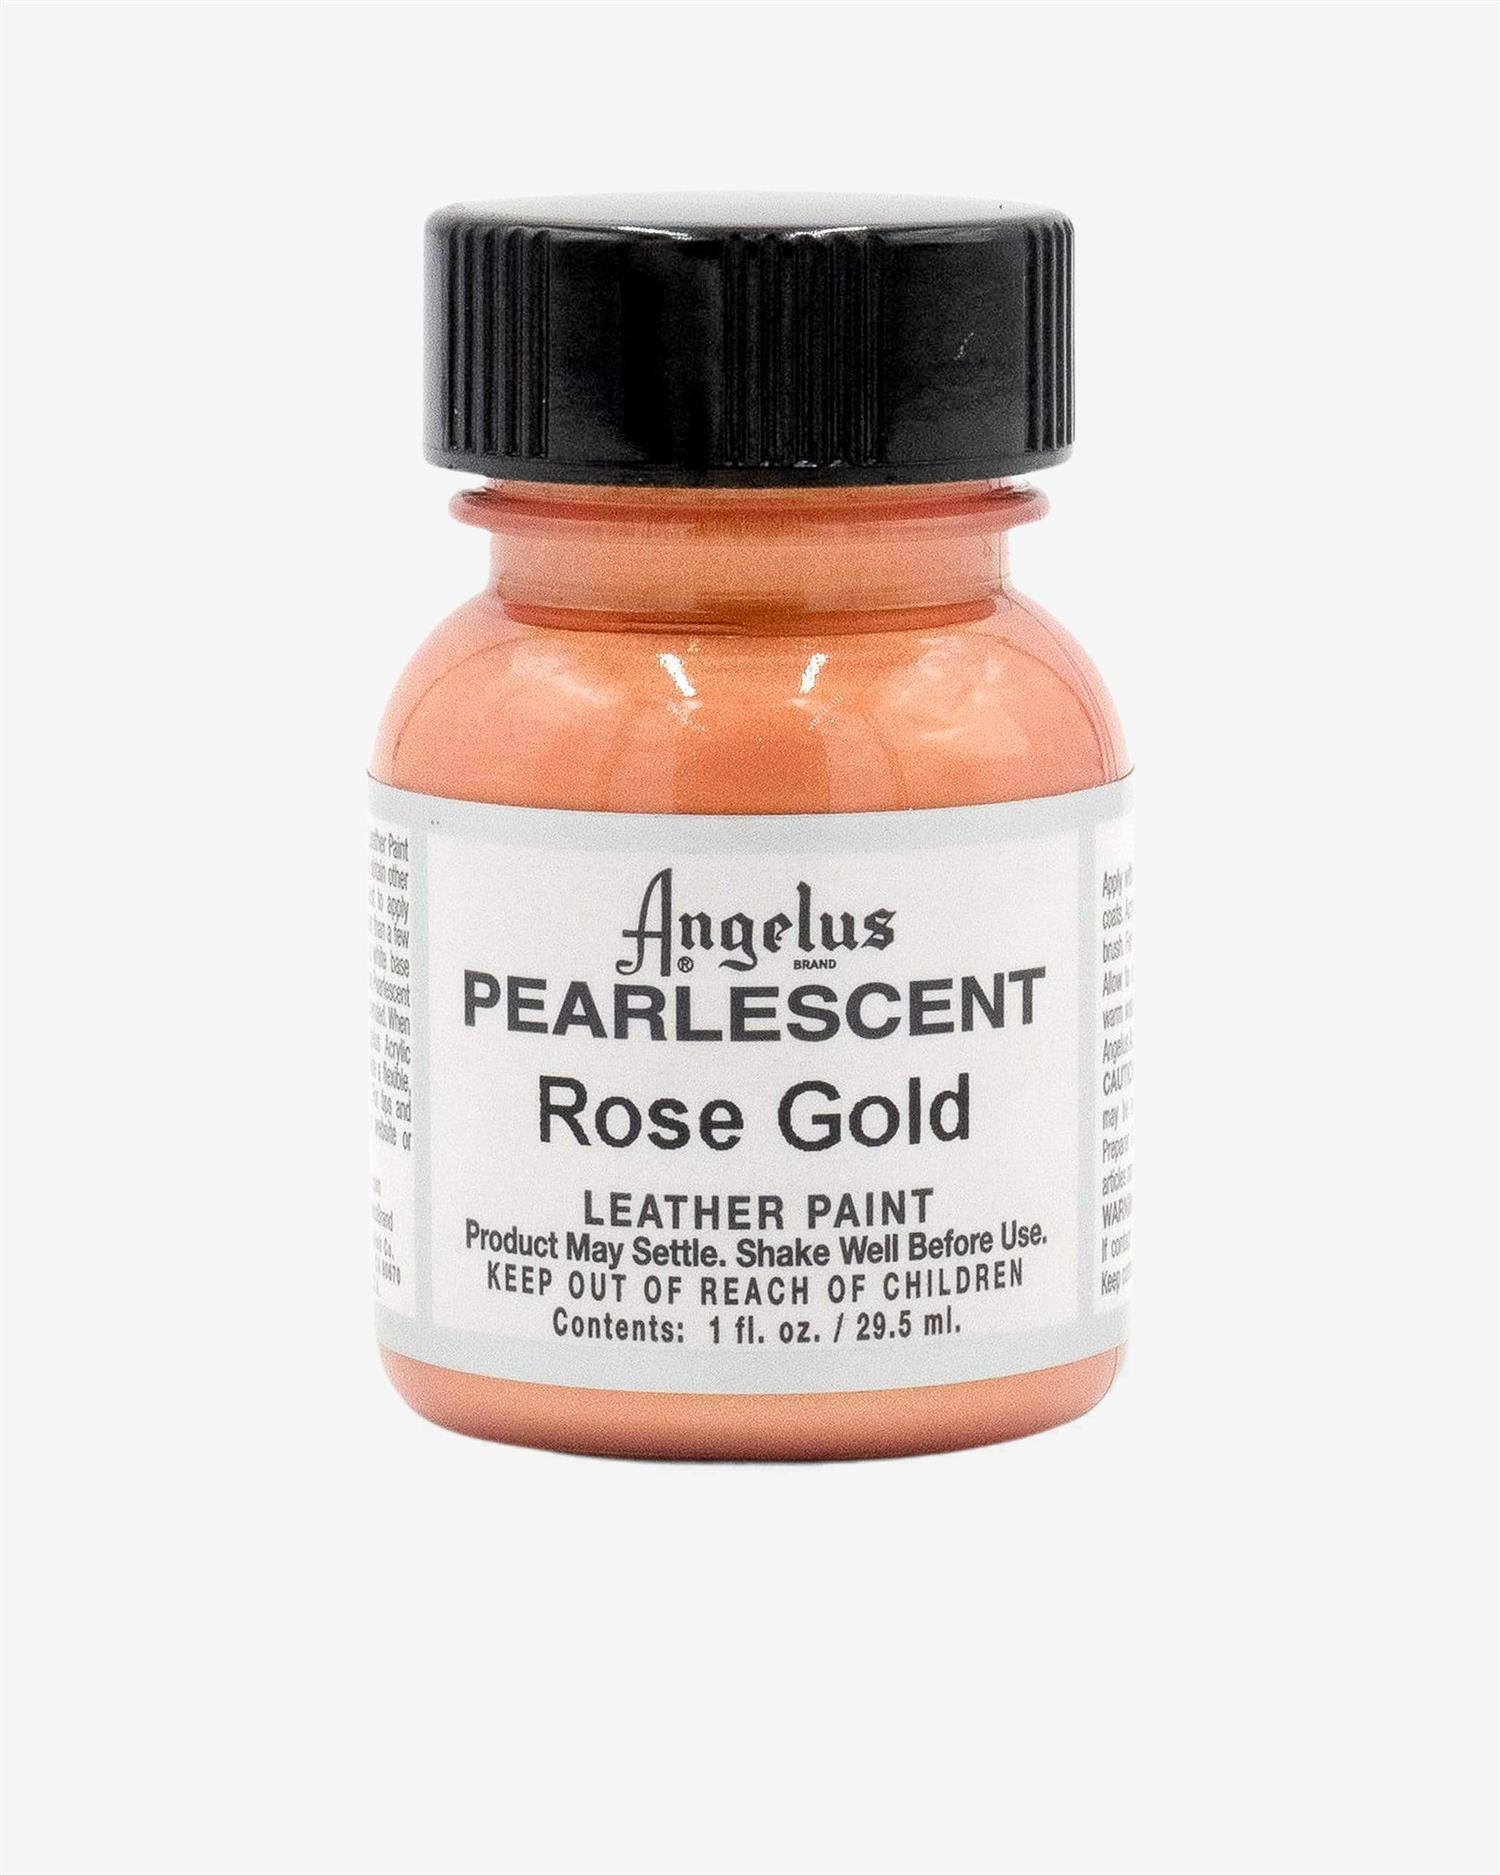 PEARLESCENT LEATHER PAINT - ROSE GOLD